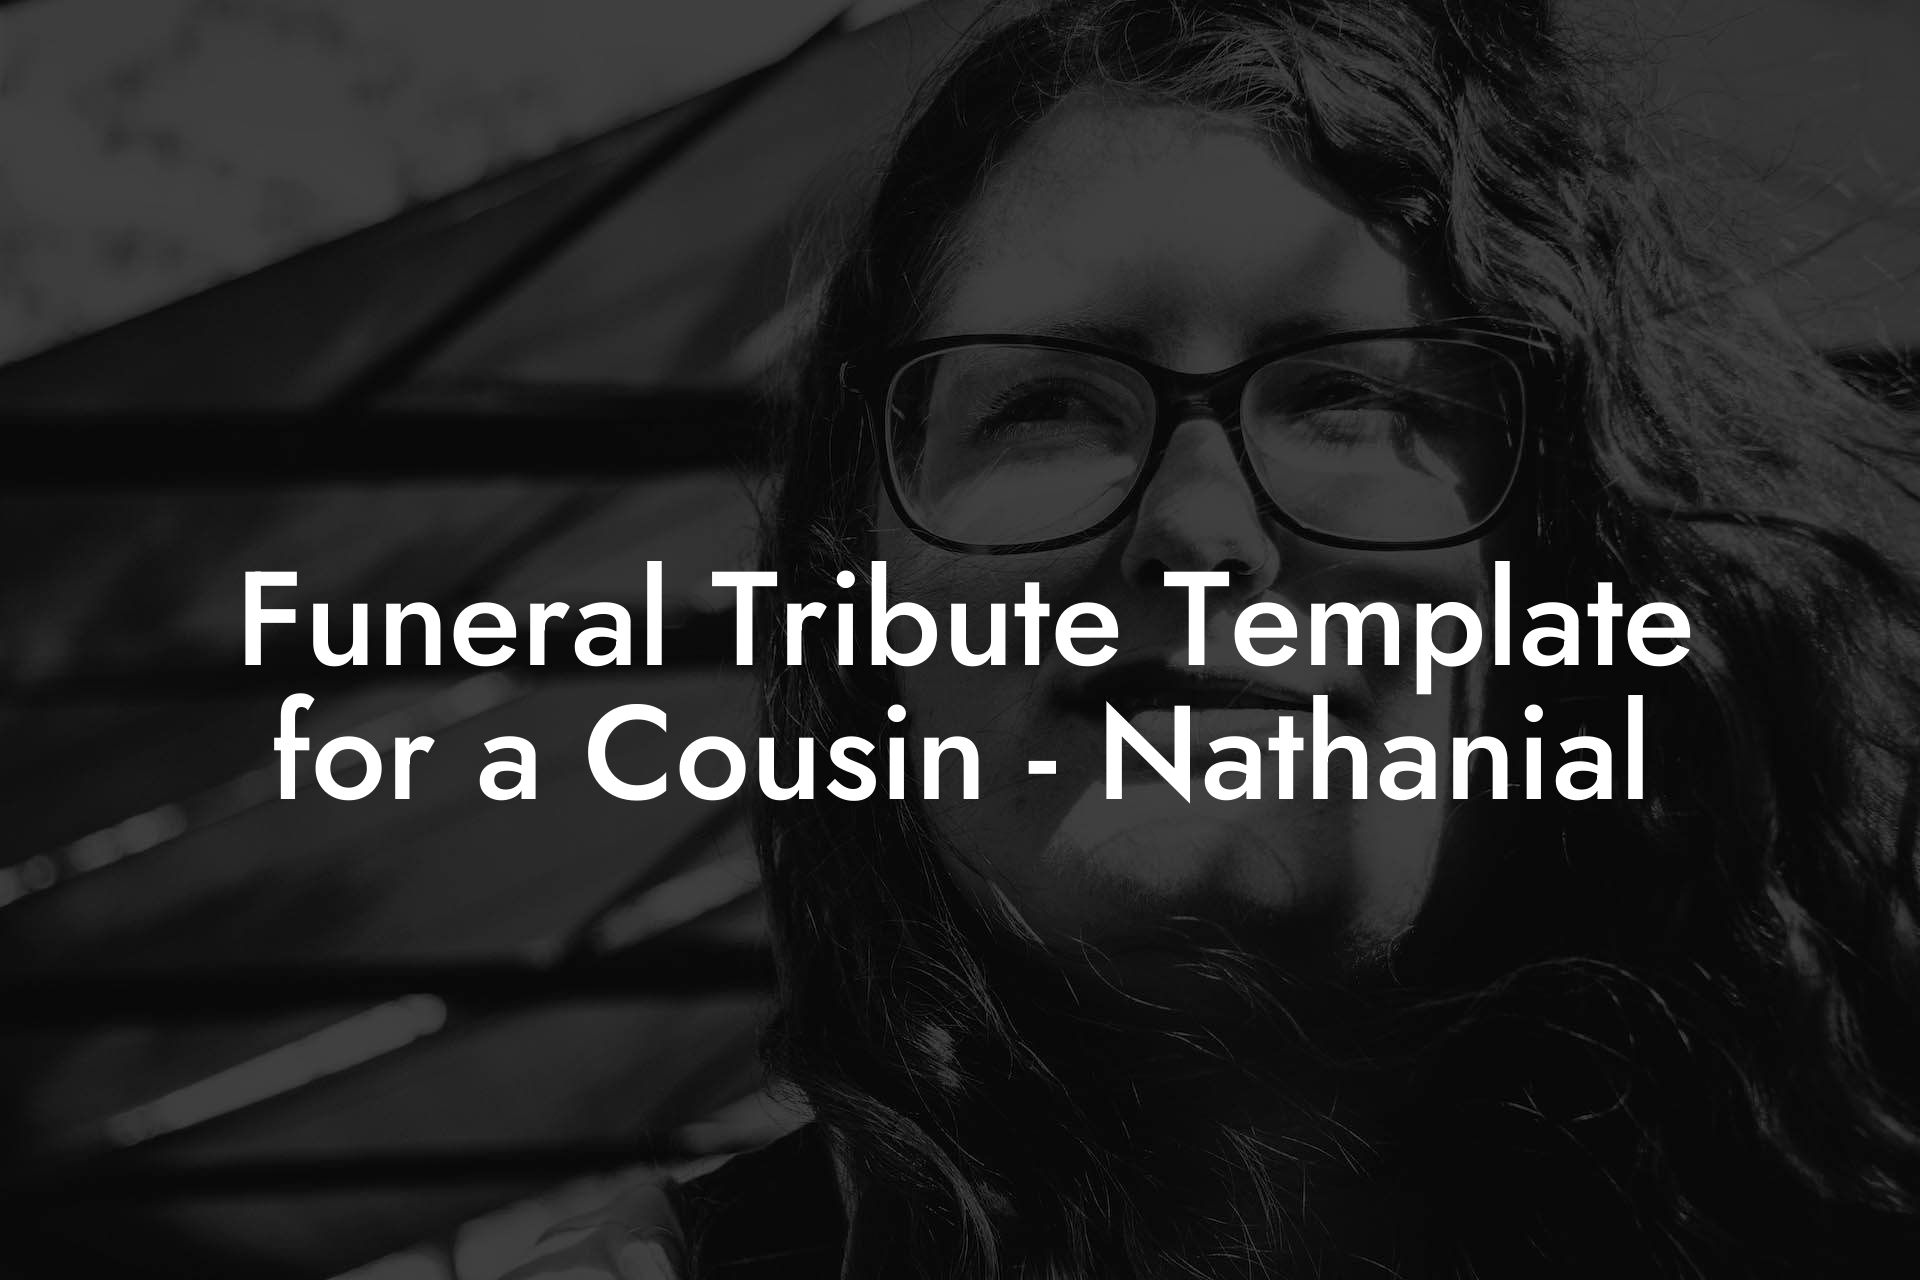 Funeral Tribute Template for a Cousin - Nathanial